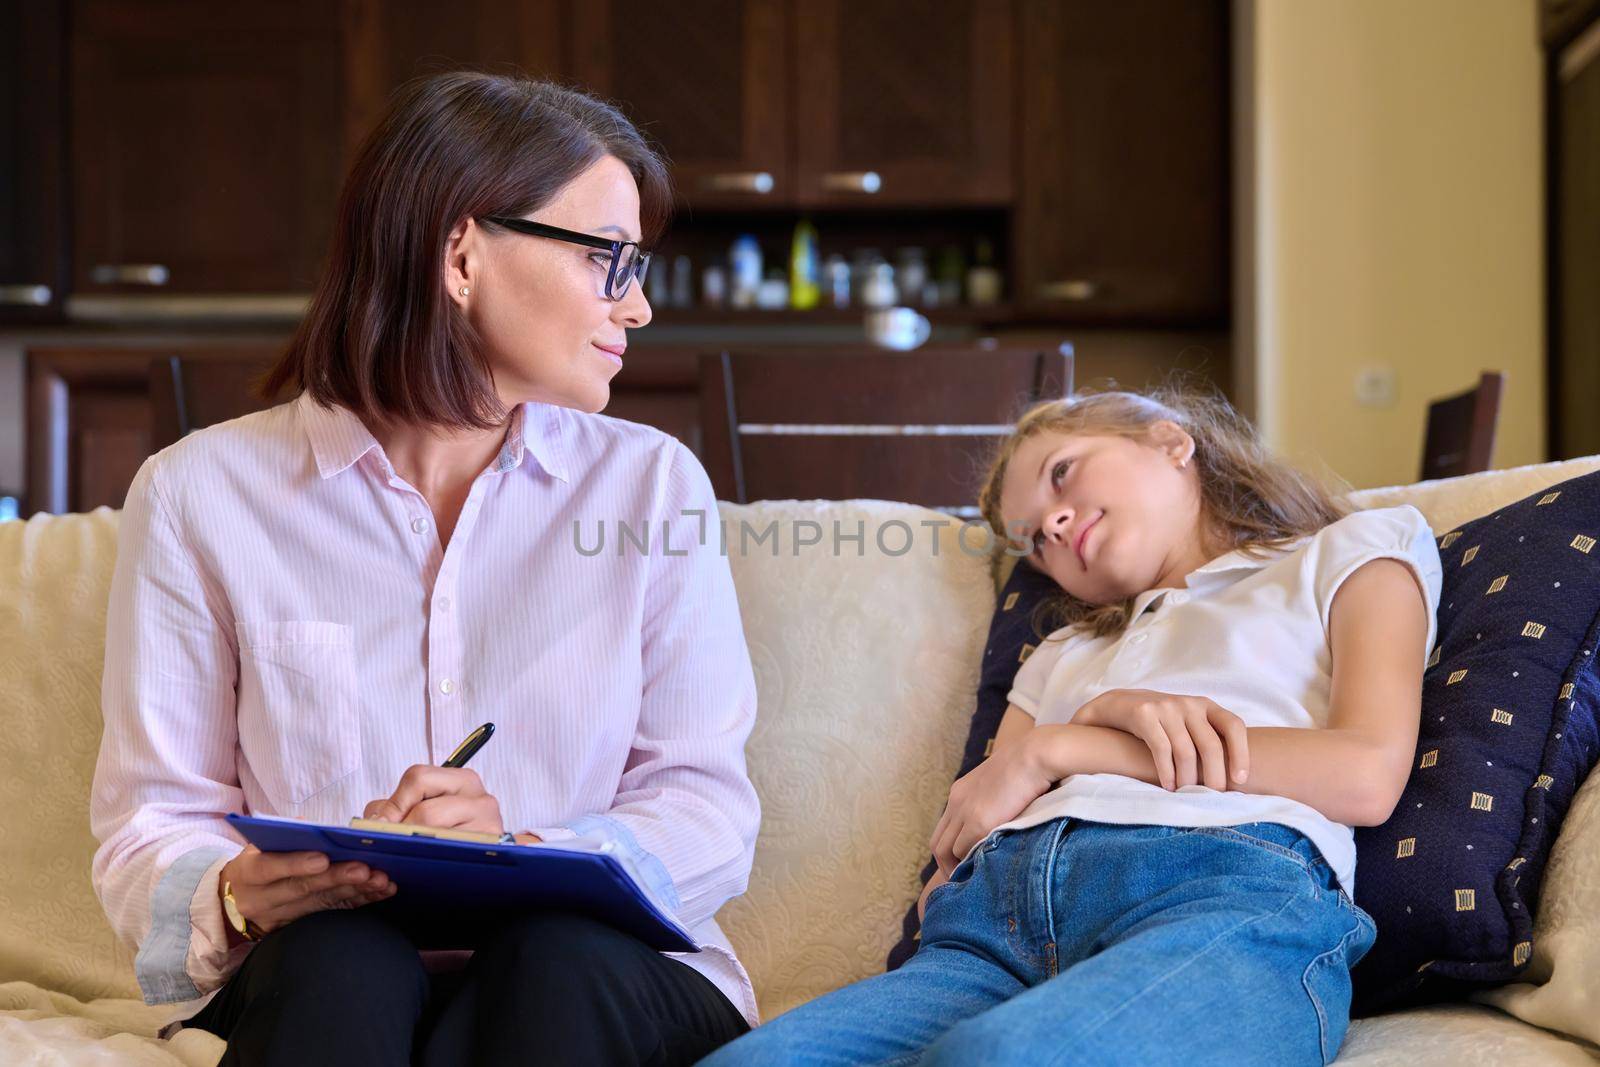 Smiling positive child girl and female psychologist teacher at session. Preteen student talking to counselor mentor therapist sitting on couch. Children mental health psychology childhood adolescence